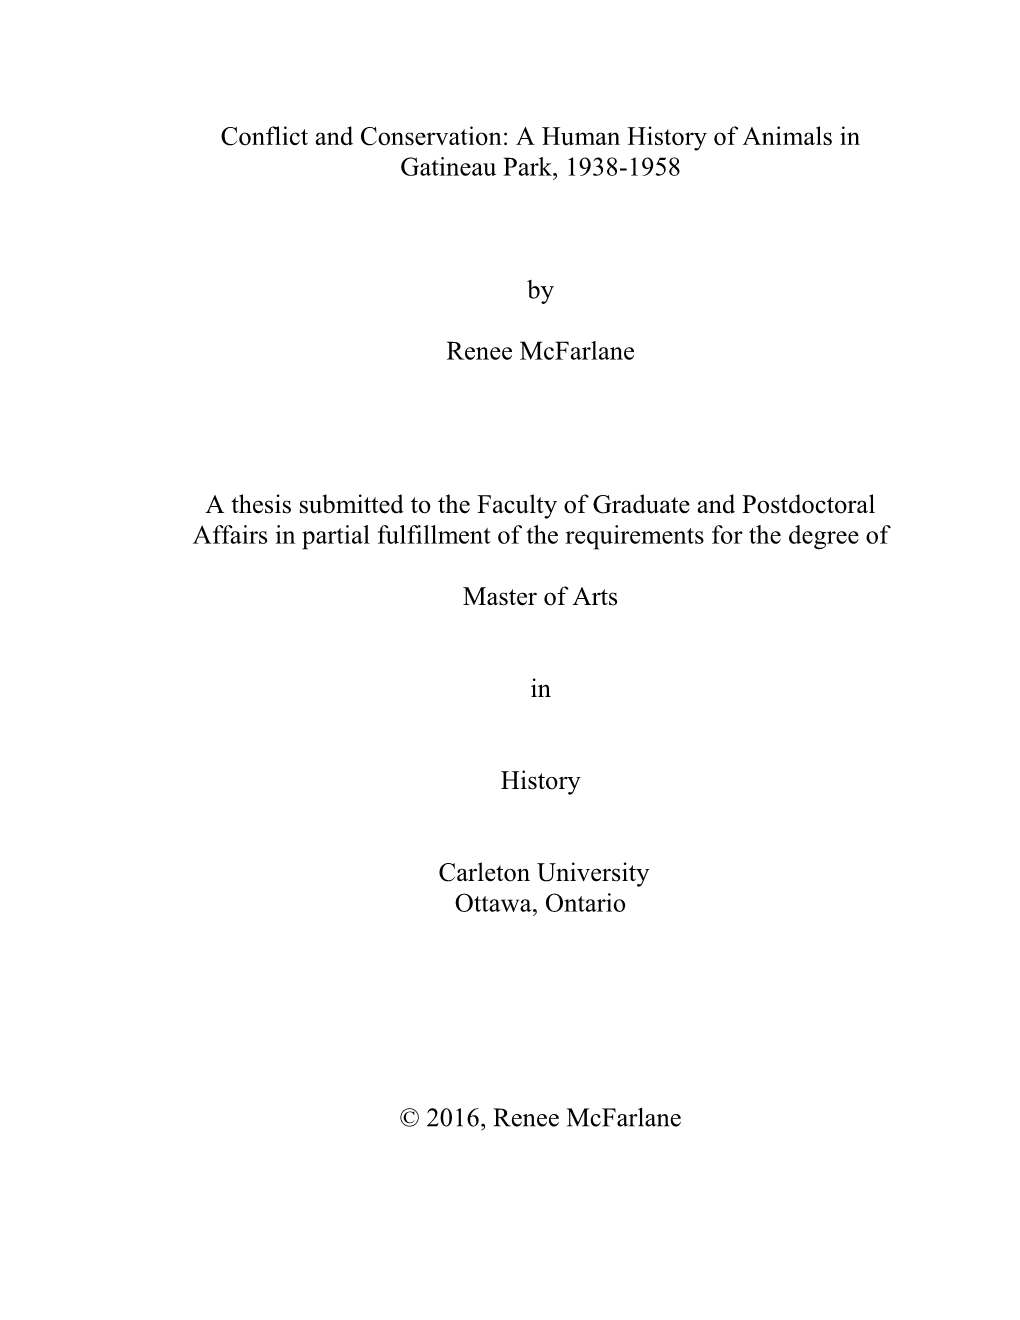 Conflict and Conservation: a Human History of Animals in Gatineau Park, 1938-1958